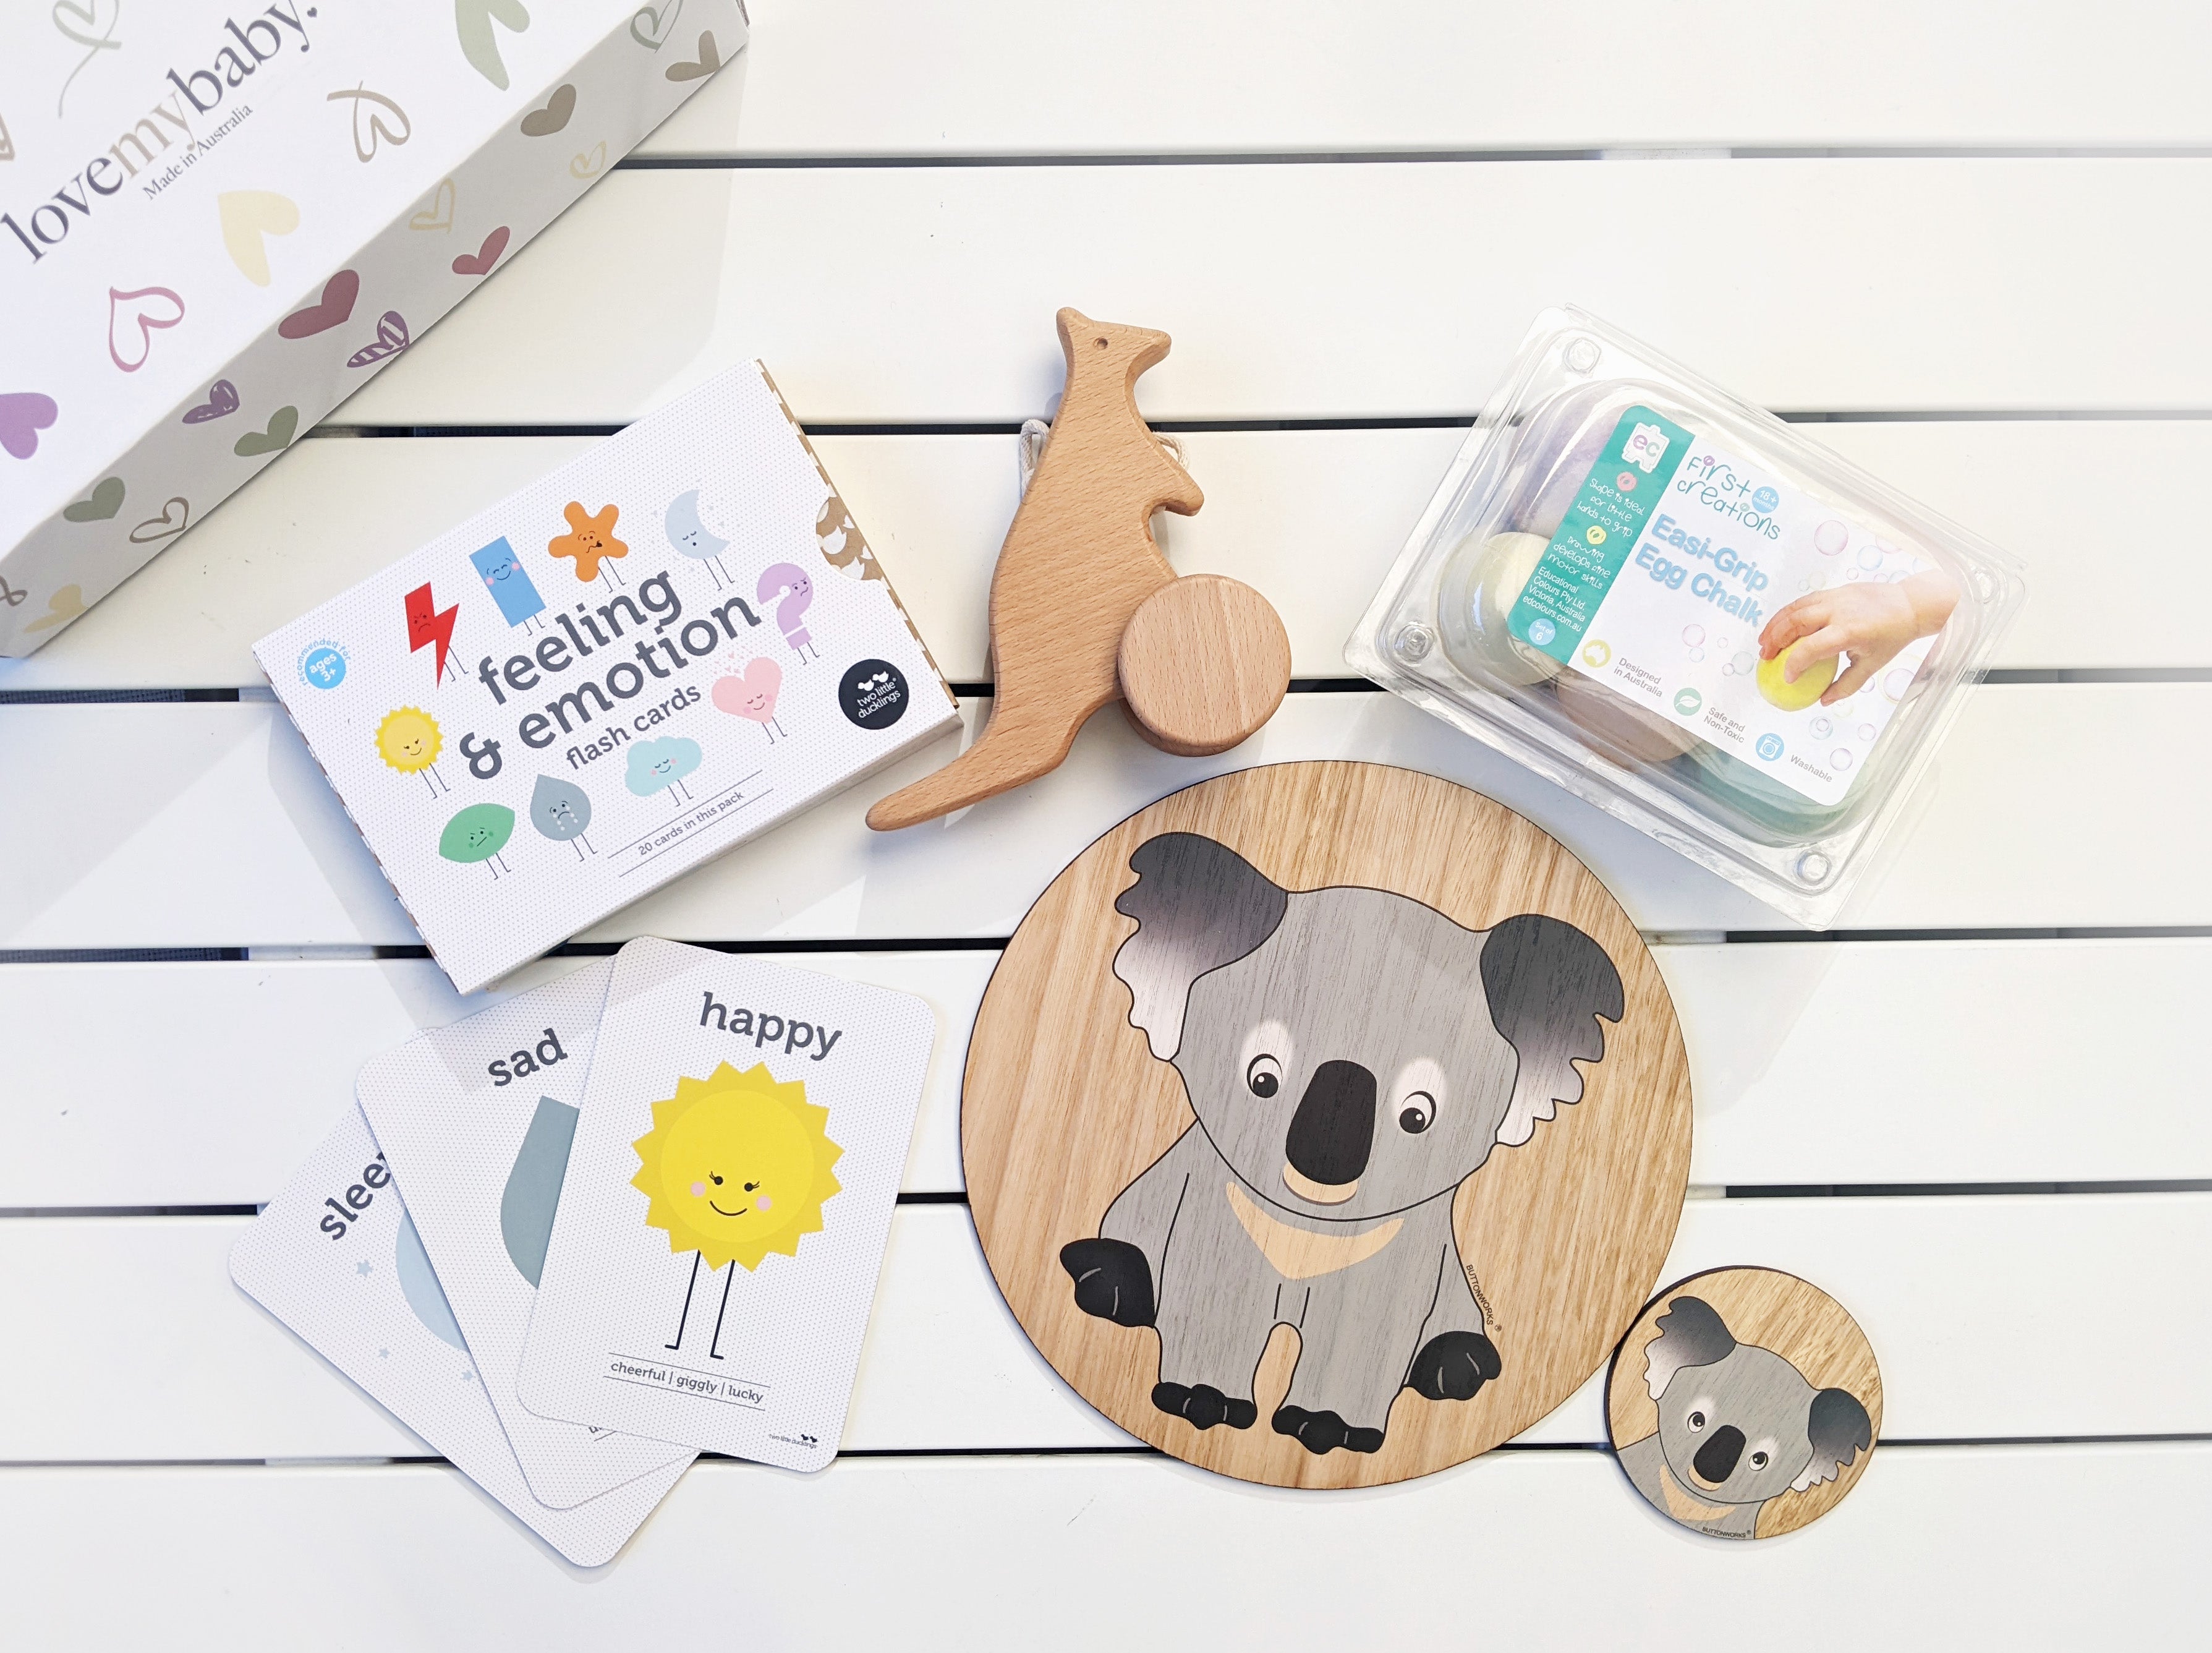 Happy Baby Box - Egg chalk, feelings and emotions flash cards, kangaroo pull-toy, koala design placemat and coaster